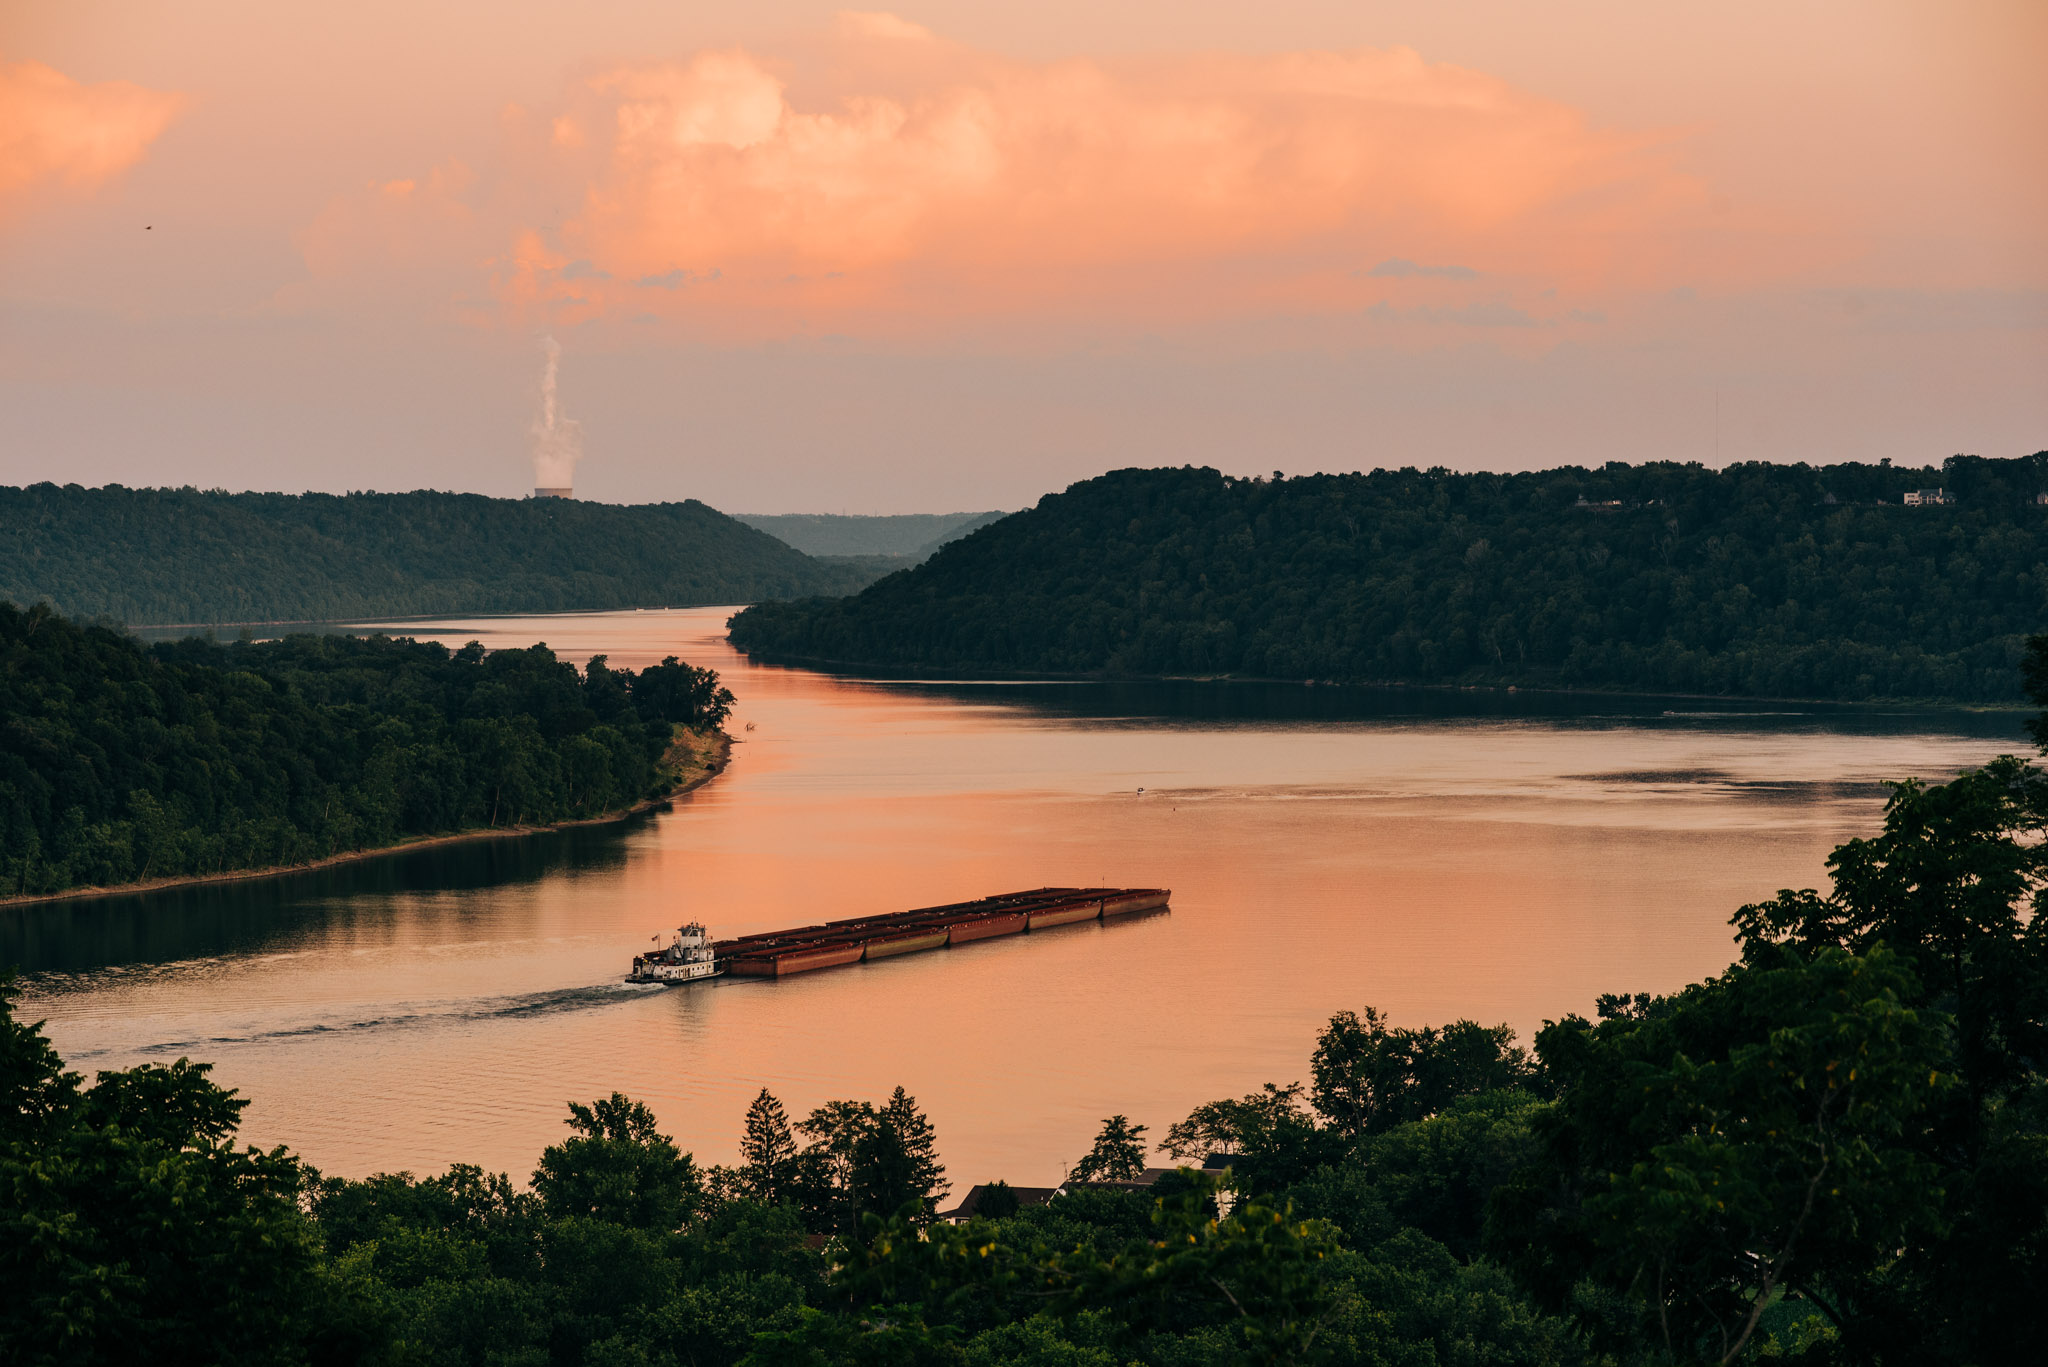 The Point at sunset with a barge on the Ohio River